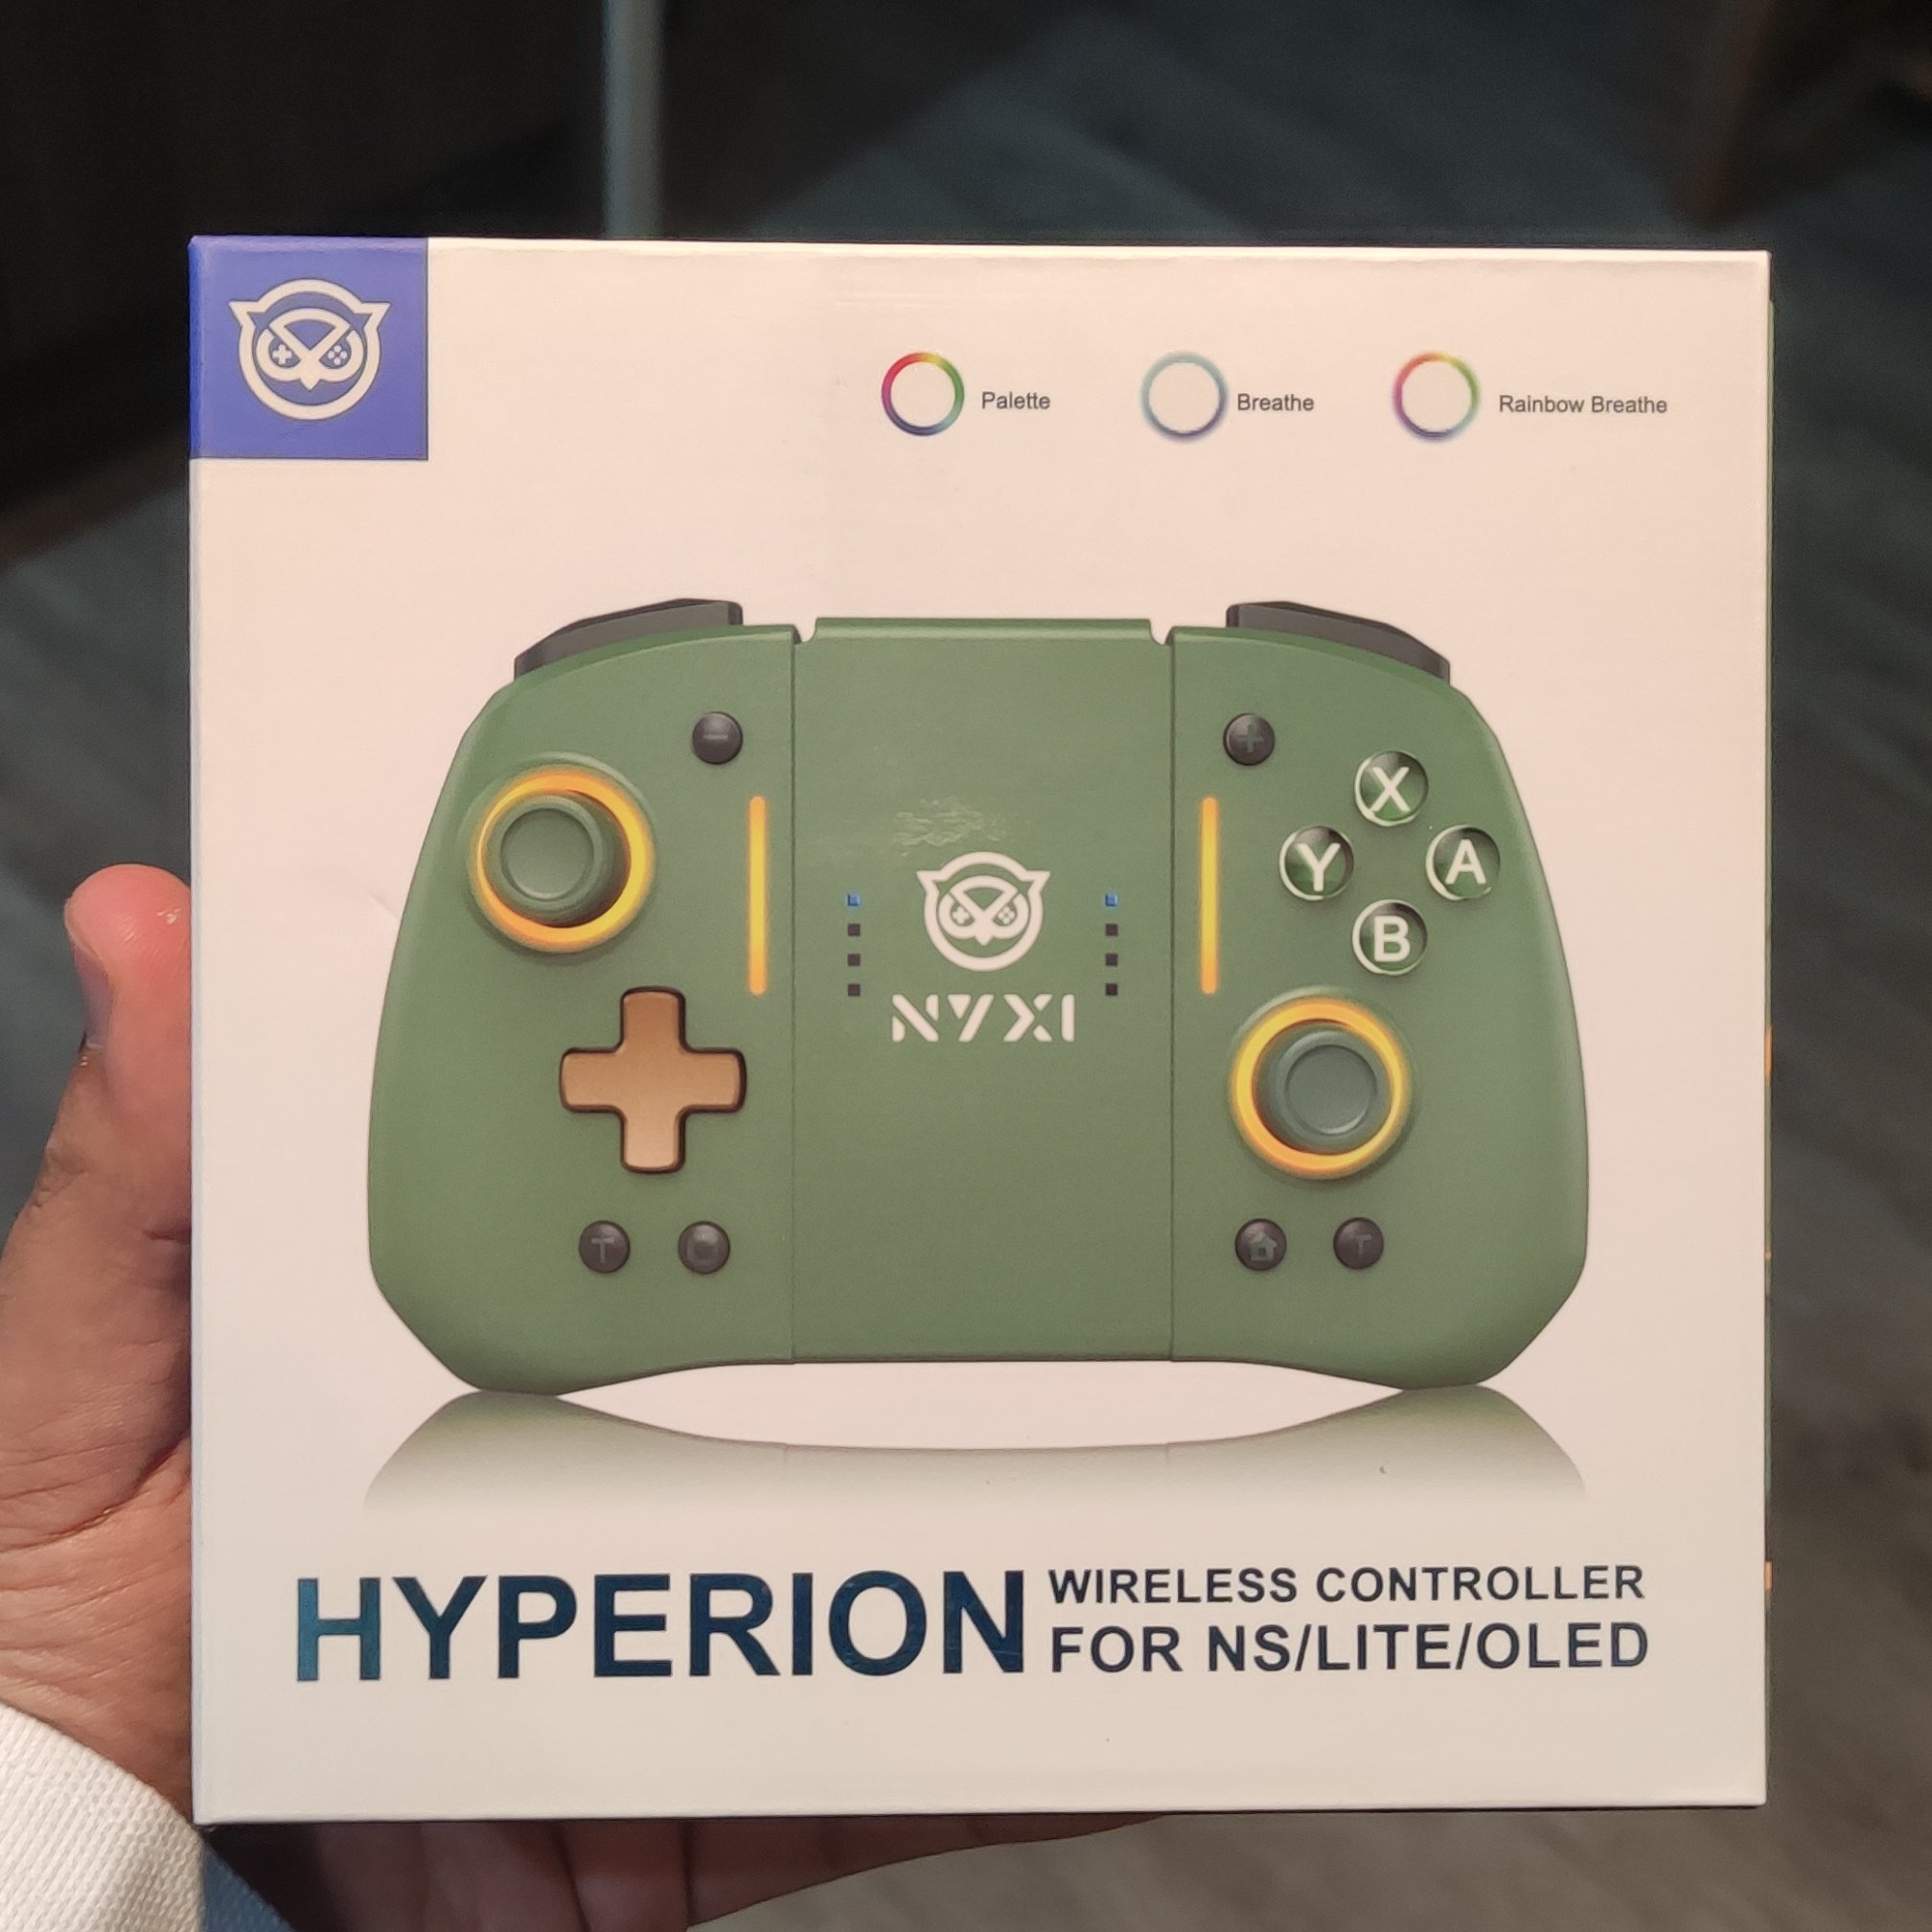 Nyxi Hyperion Joypad Unboxing & Demonstration, Nintendo Switch, game  controller